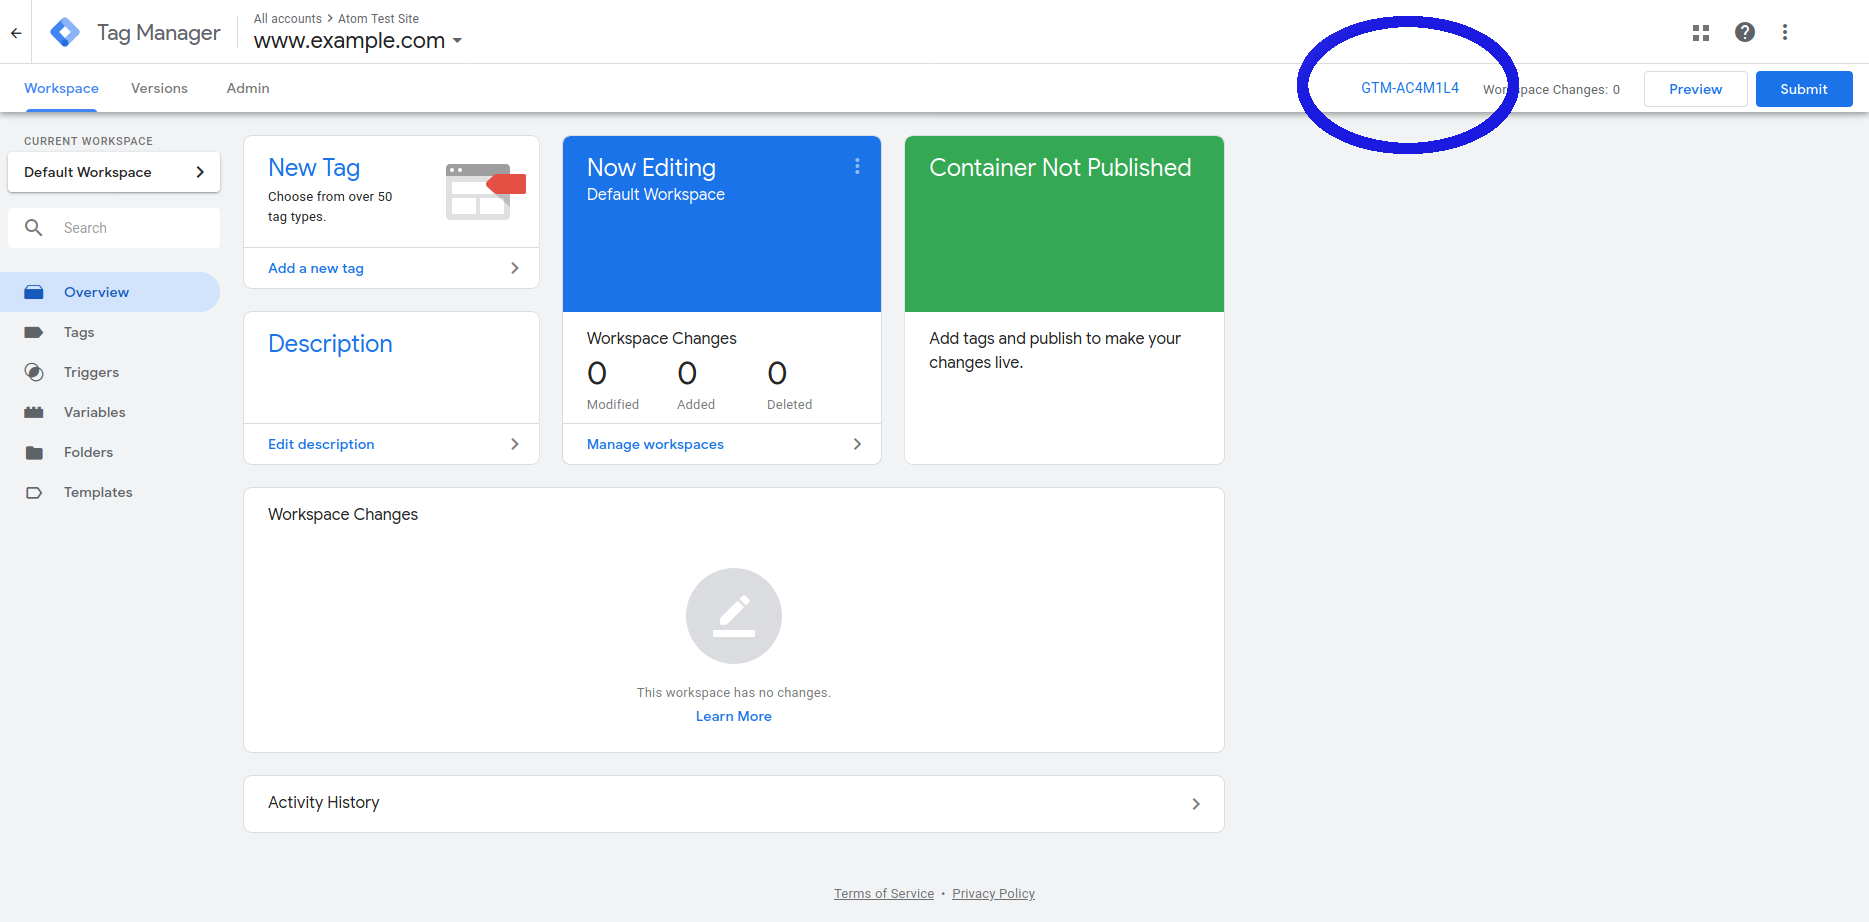 Google Tag Manager dashboard, with the container ID highlighted in the top right corner